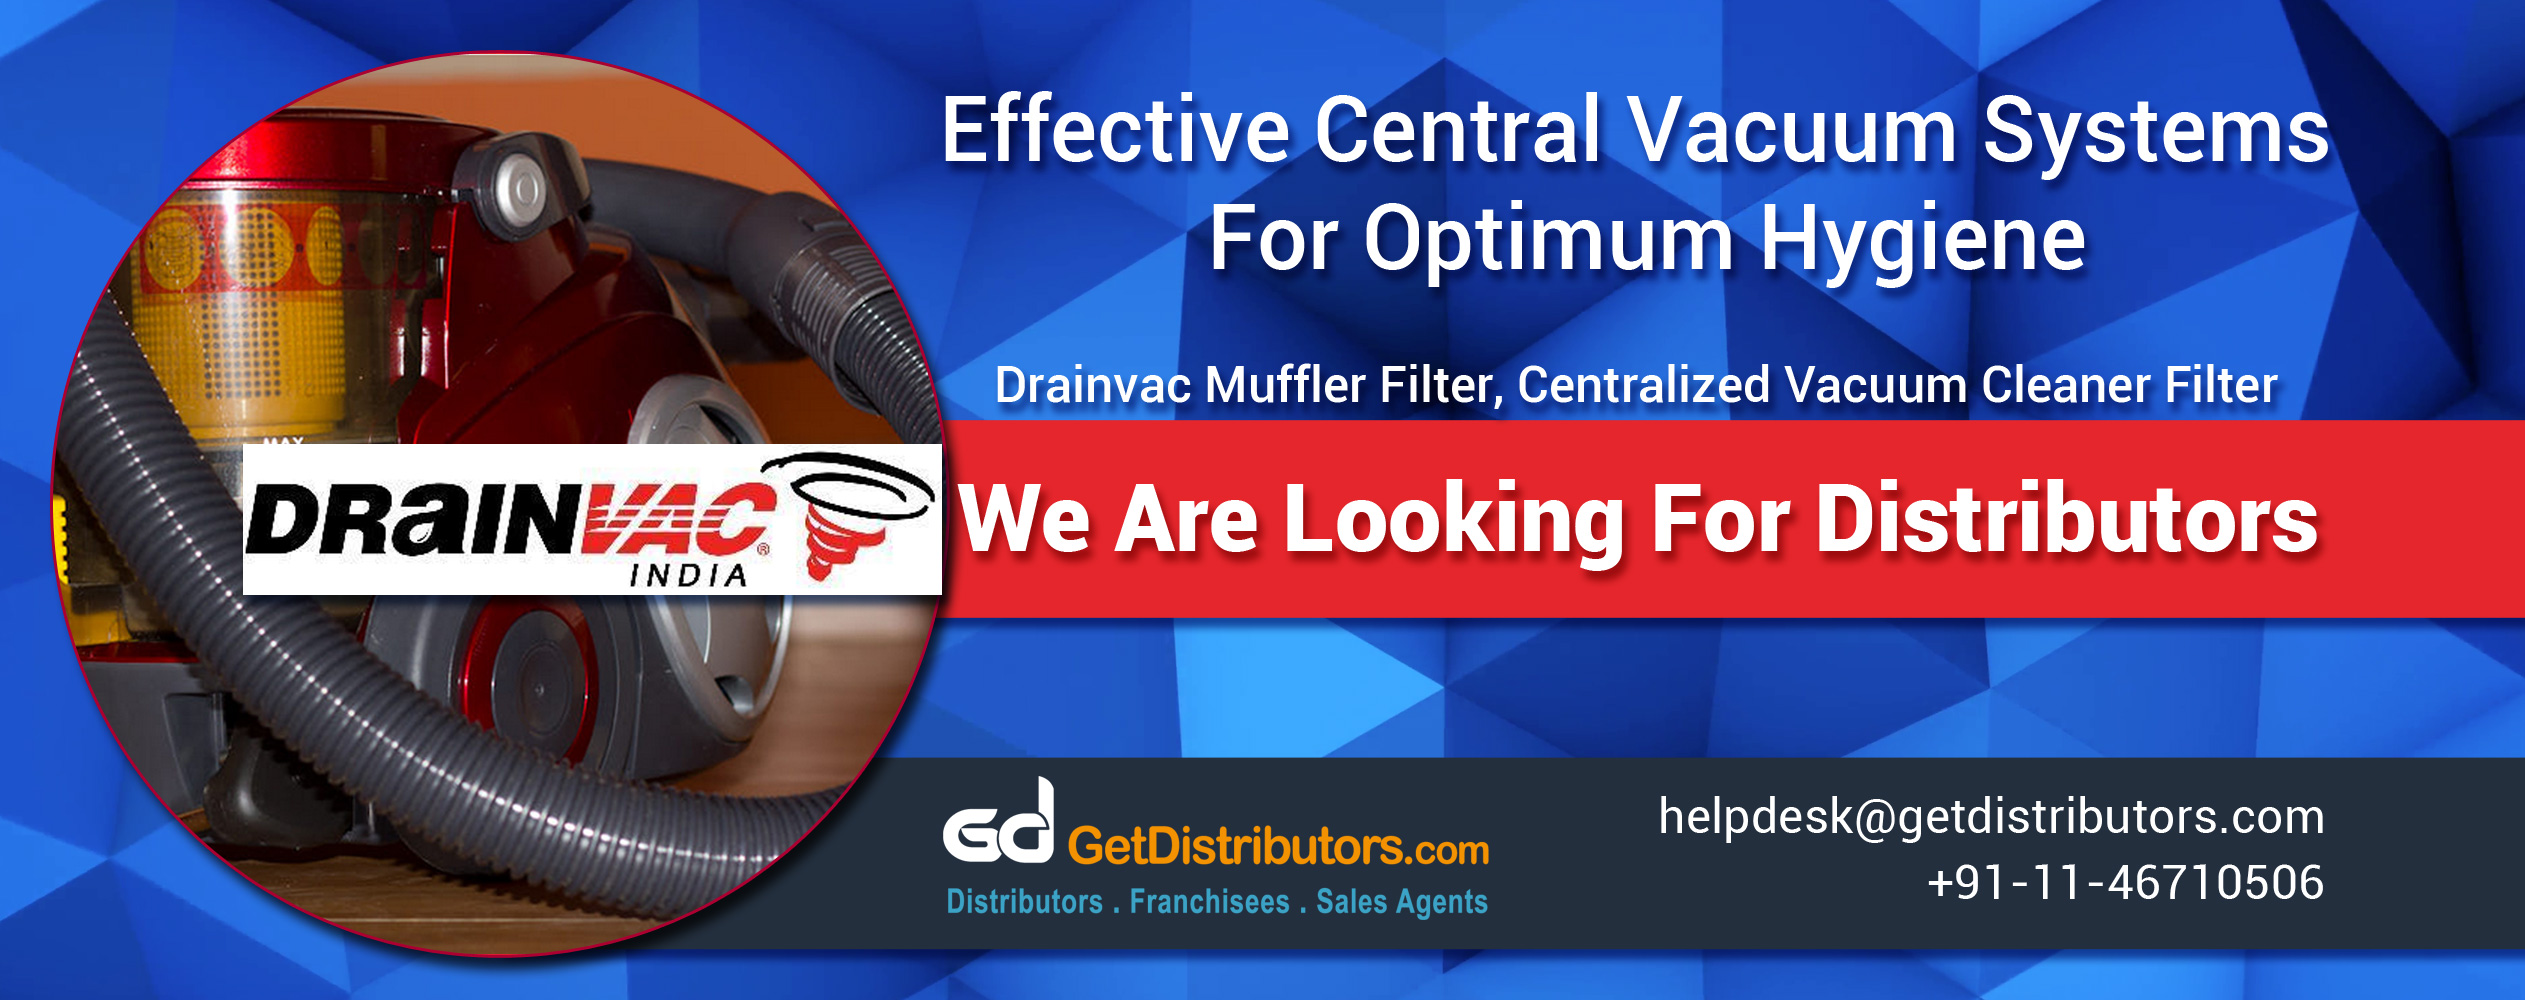 Effective Central Vacuum Systems for Optimum Hygiene